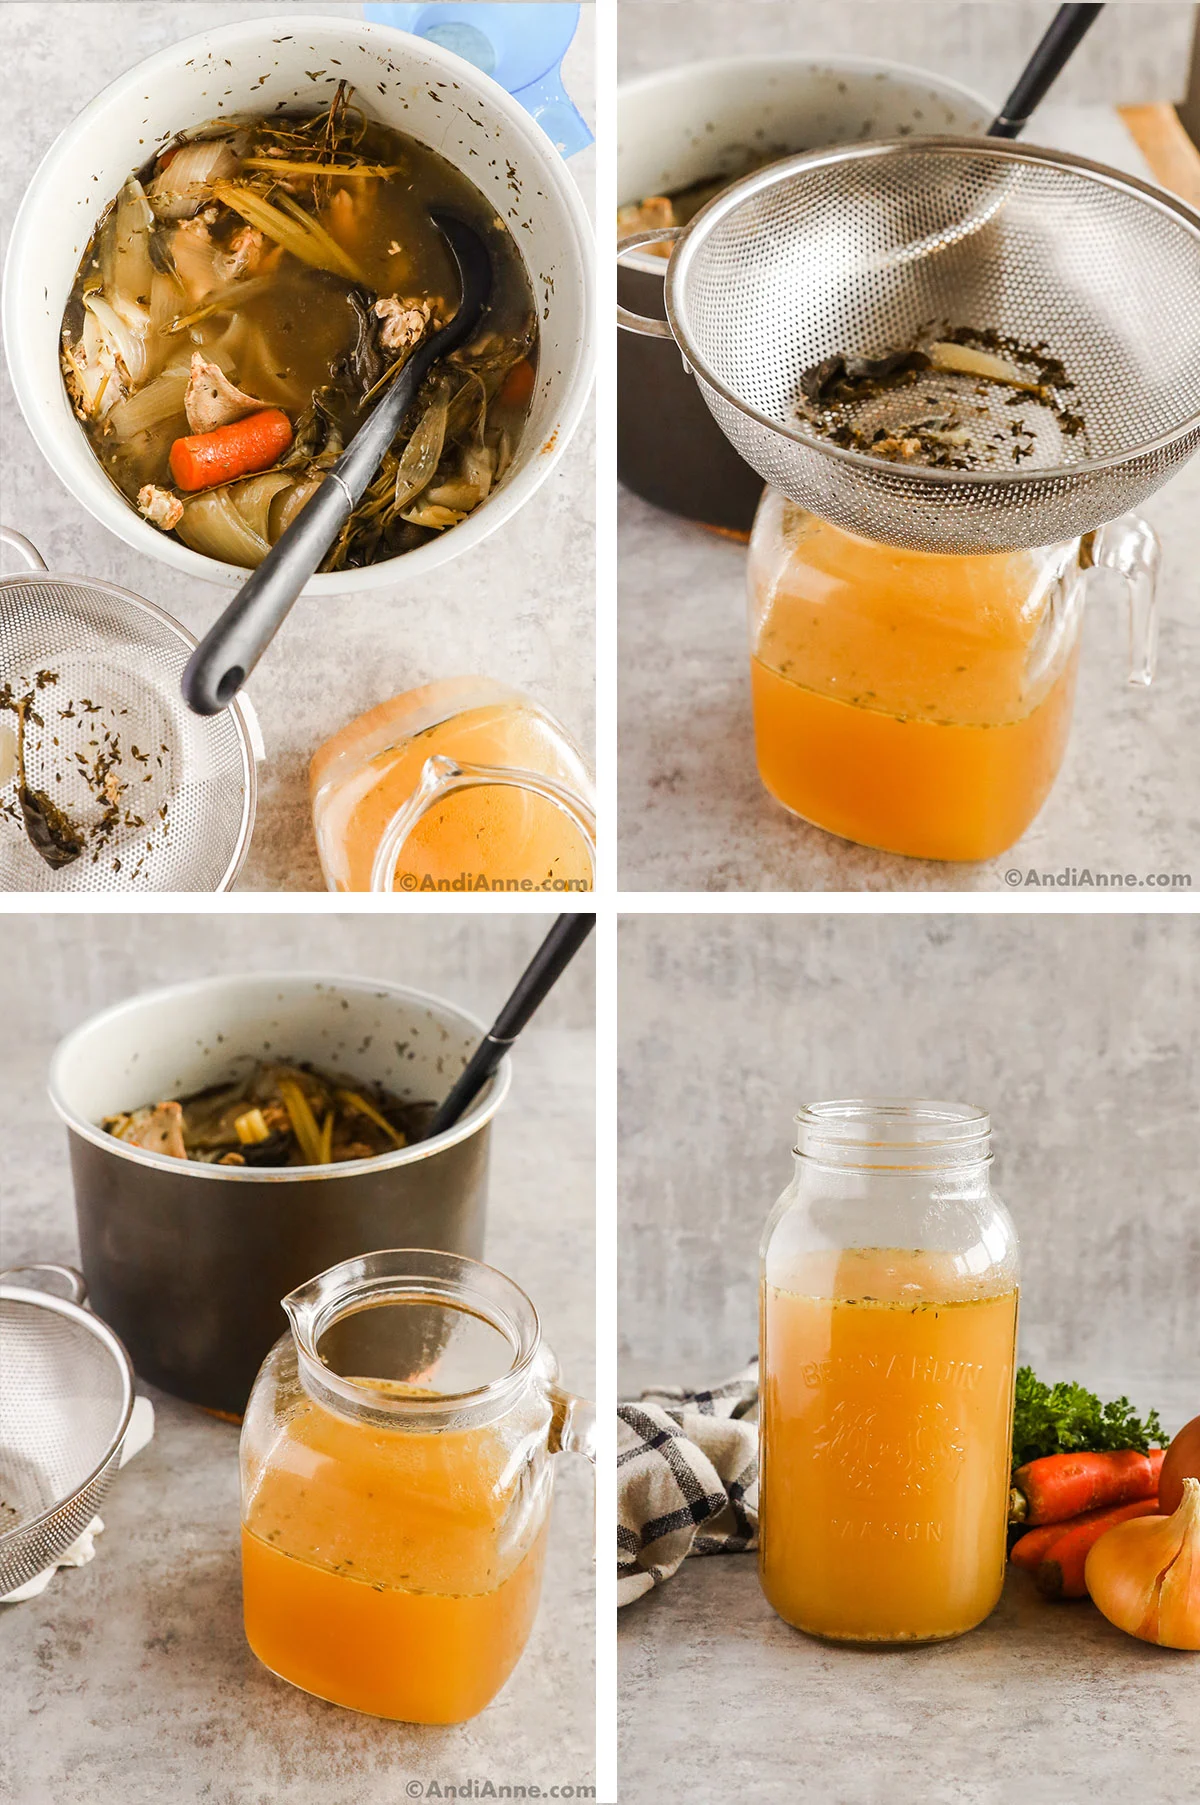 Four images first is instant pot with veggies and turkey carcass in water. Second is strainer sitting on glass jar, third is instant pot and jar of broth in front. Fourth is jar of turkey broth with veggies beside it.